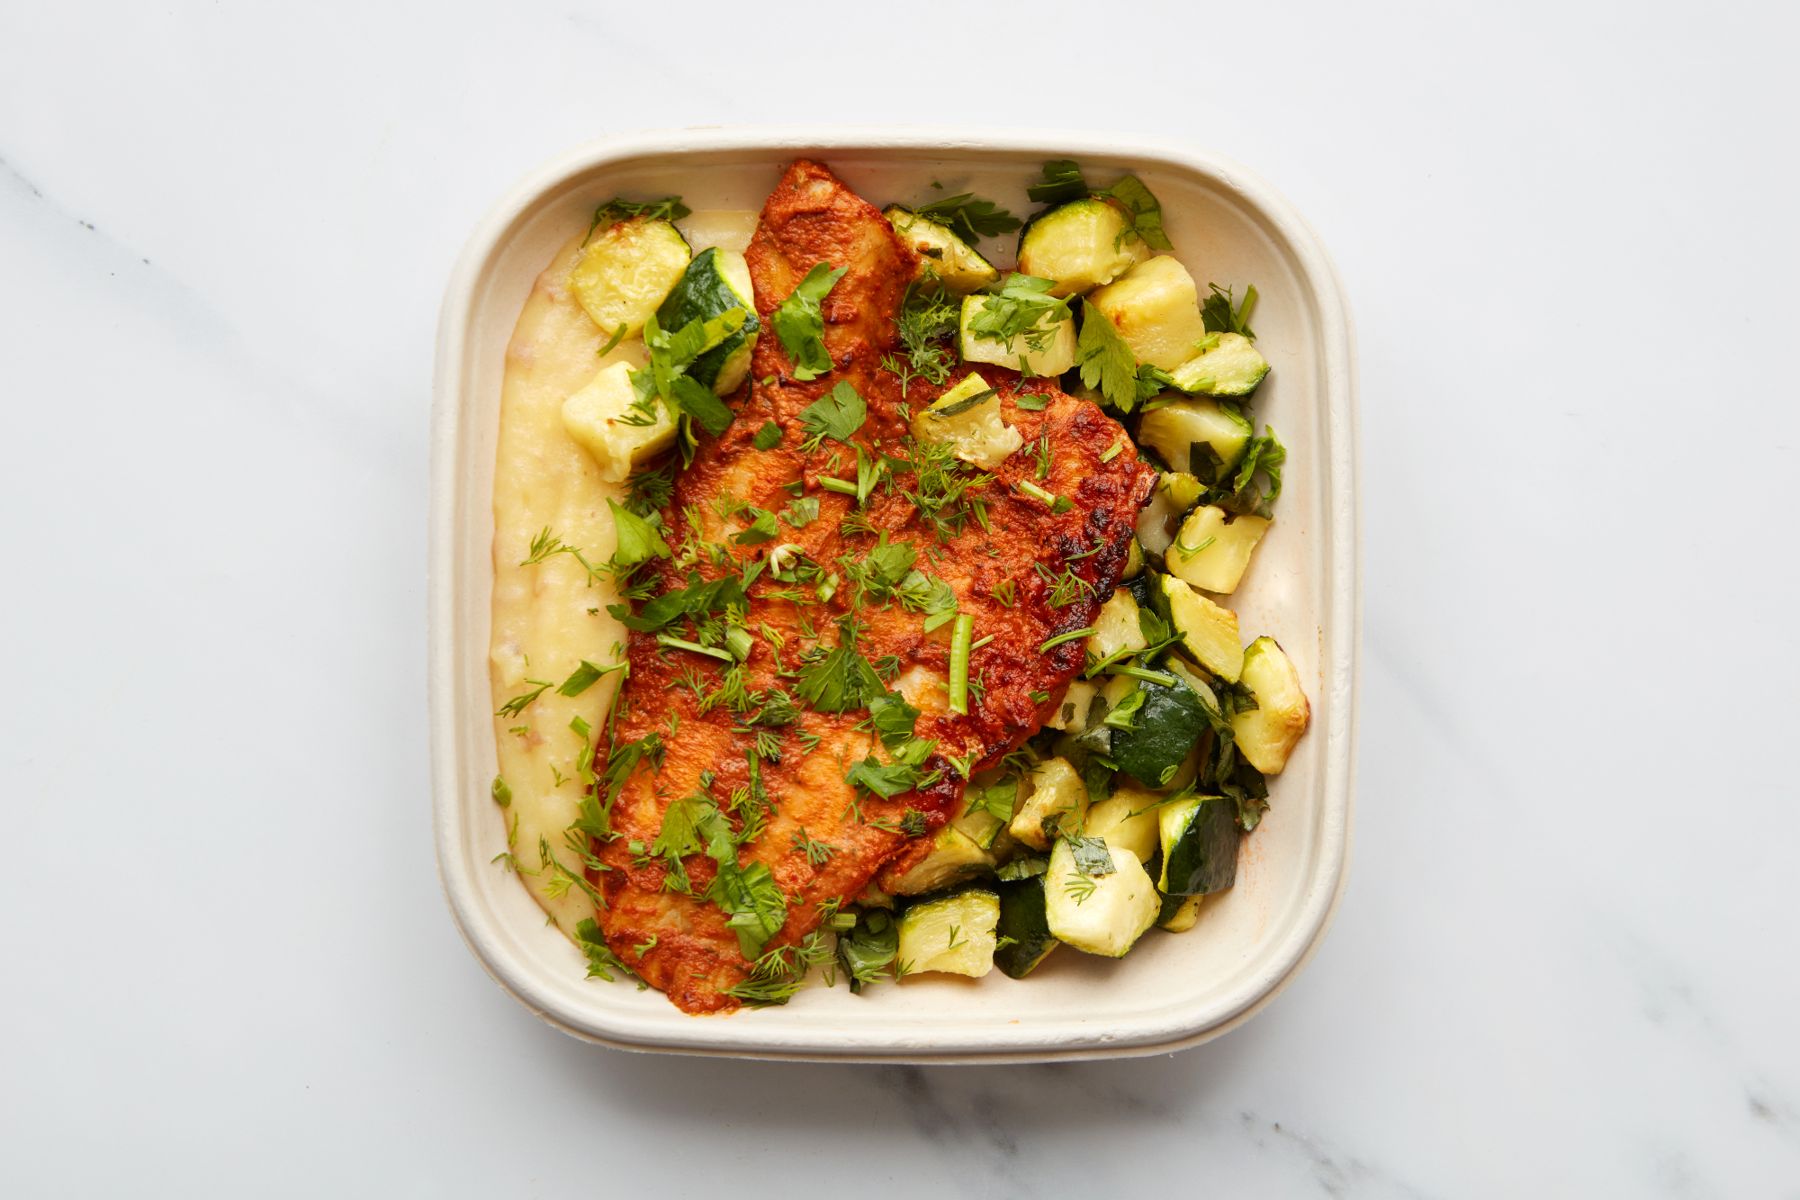 Lions Prep - Mediterranean Baked Sea Bass, Creamed Potatoes, Basil Roasted Courgettes & Tomato Butter Sauce